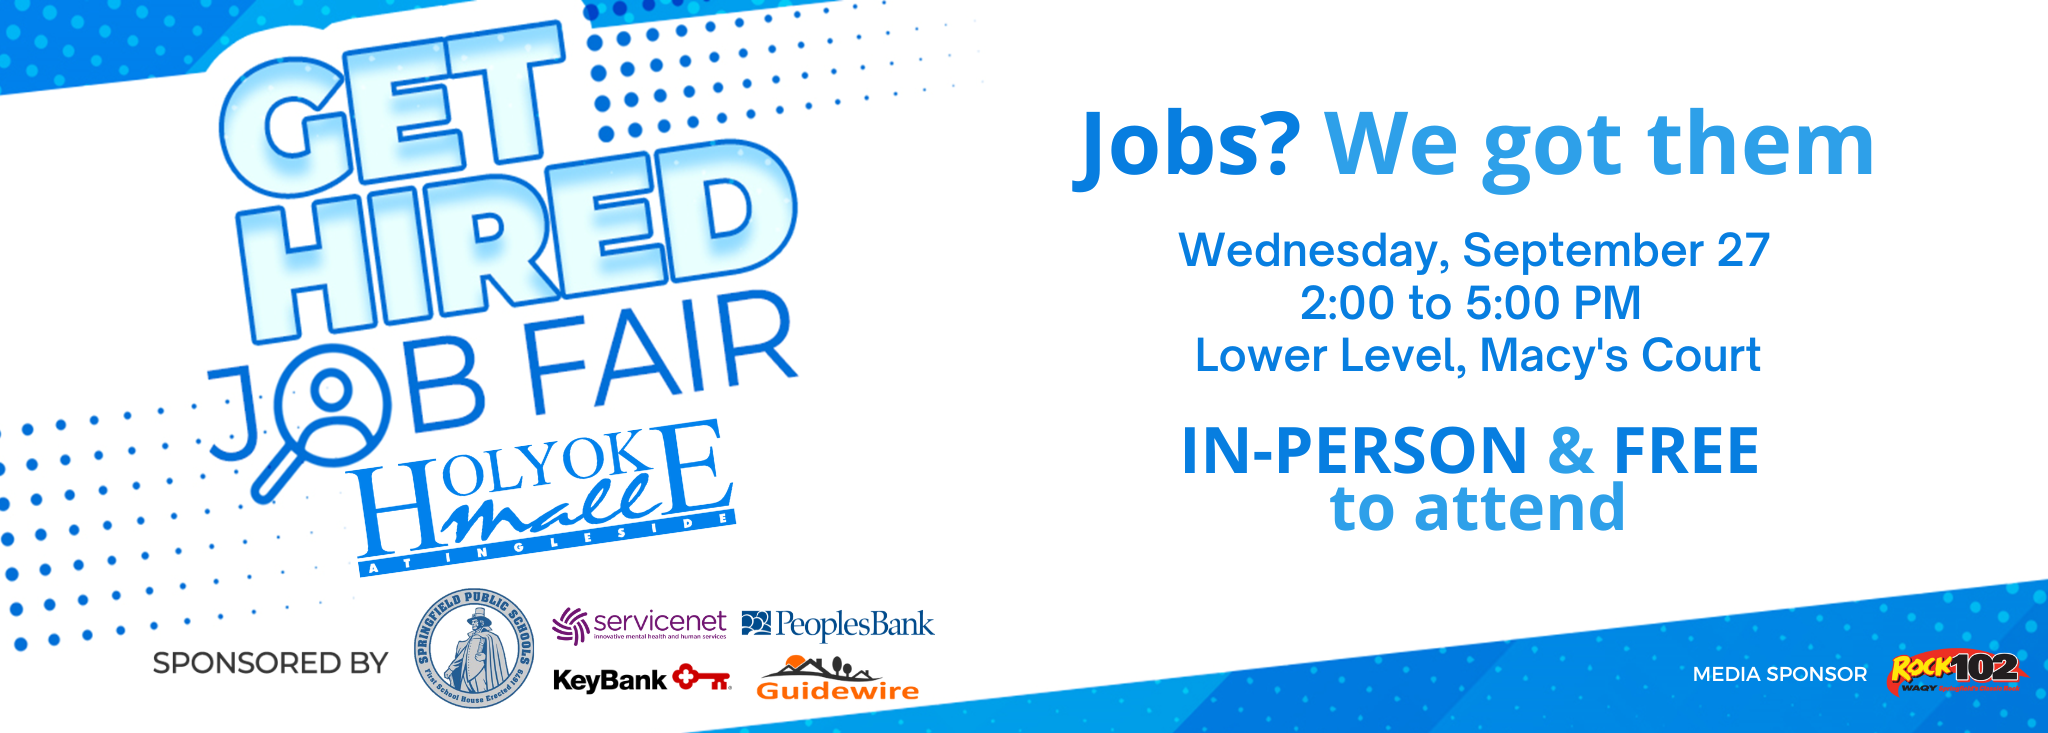 Get Hired Job Fair on September 27 from 2PM to 5PM on the lower level near Macy's.